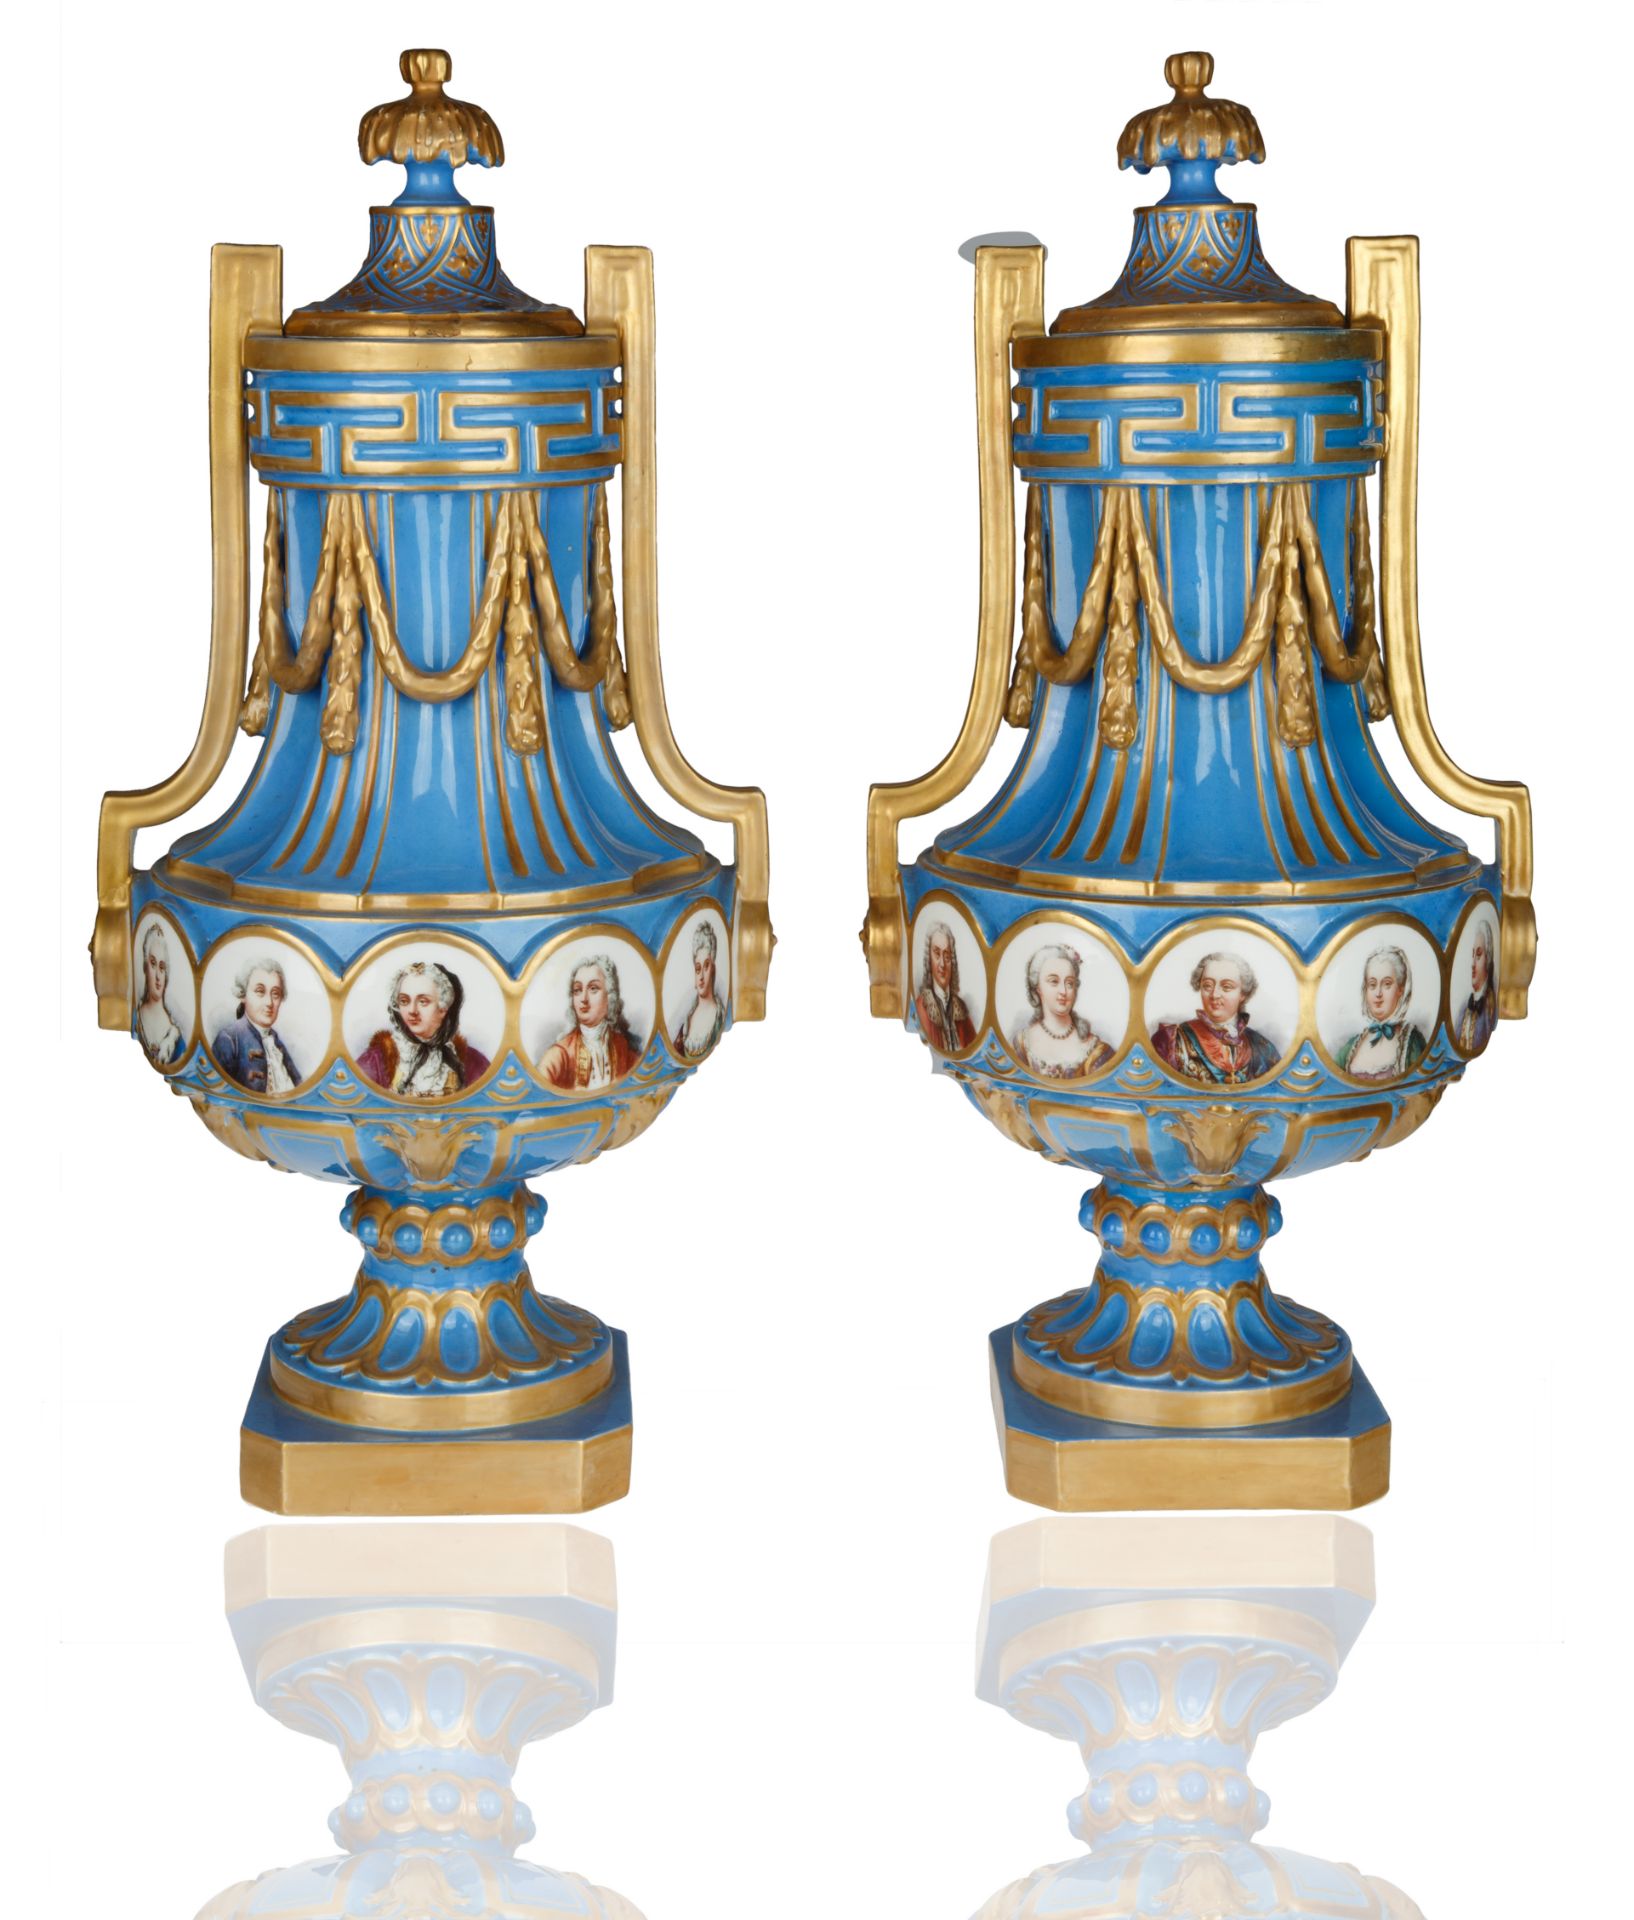 PAIR OF PORCELAIN 'NEAPOLITAN' SEVRES-STYLE VASES - Image 2 of 5